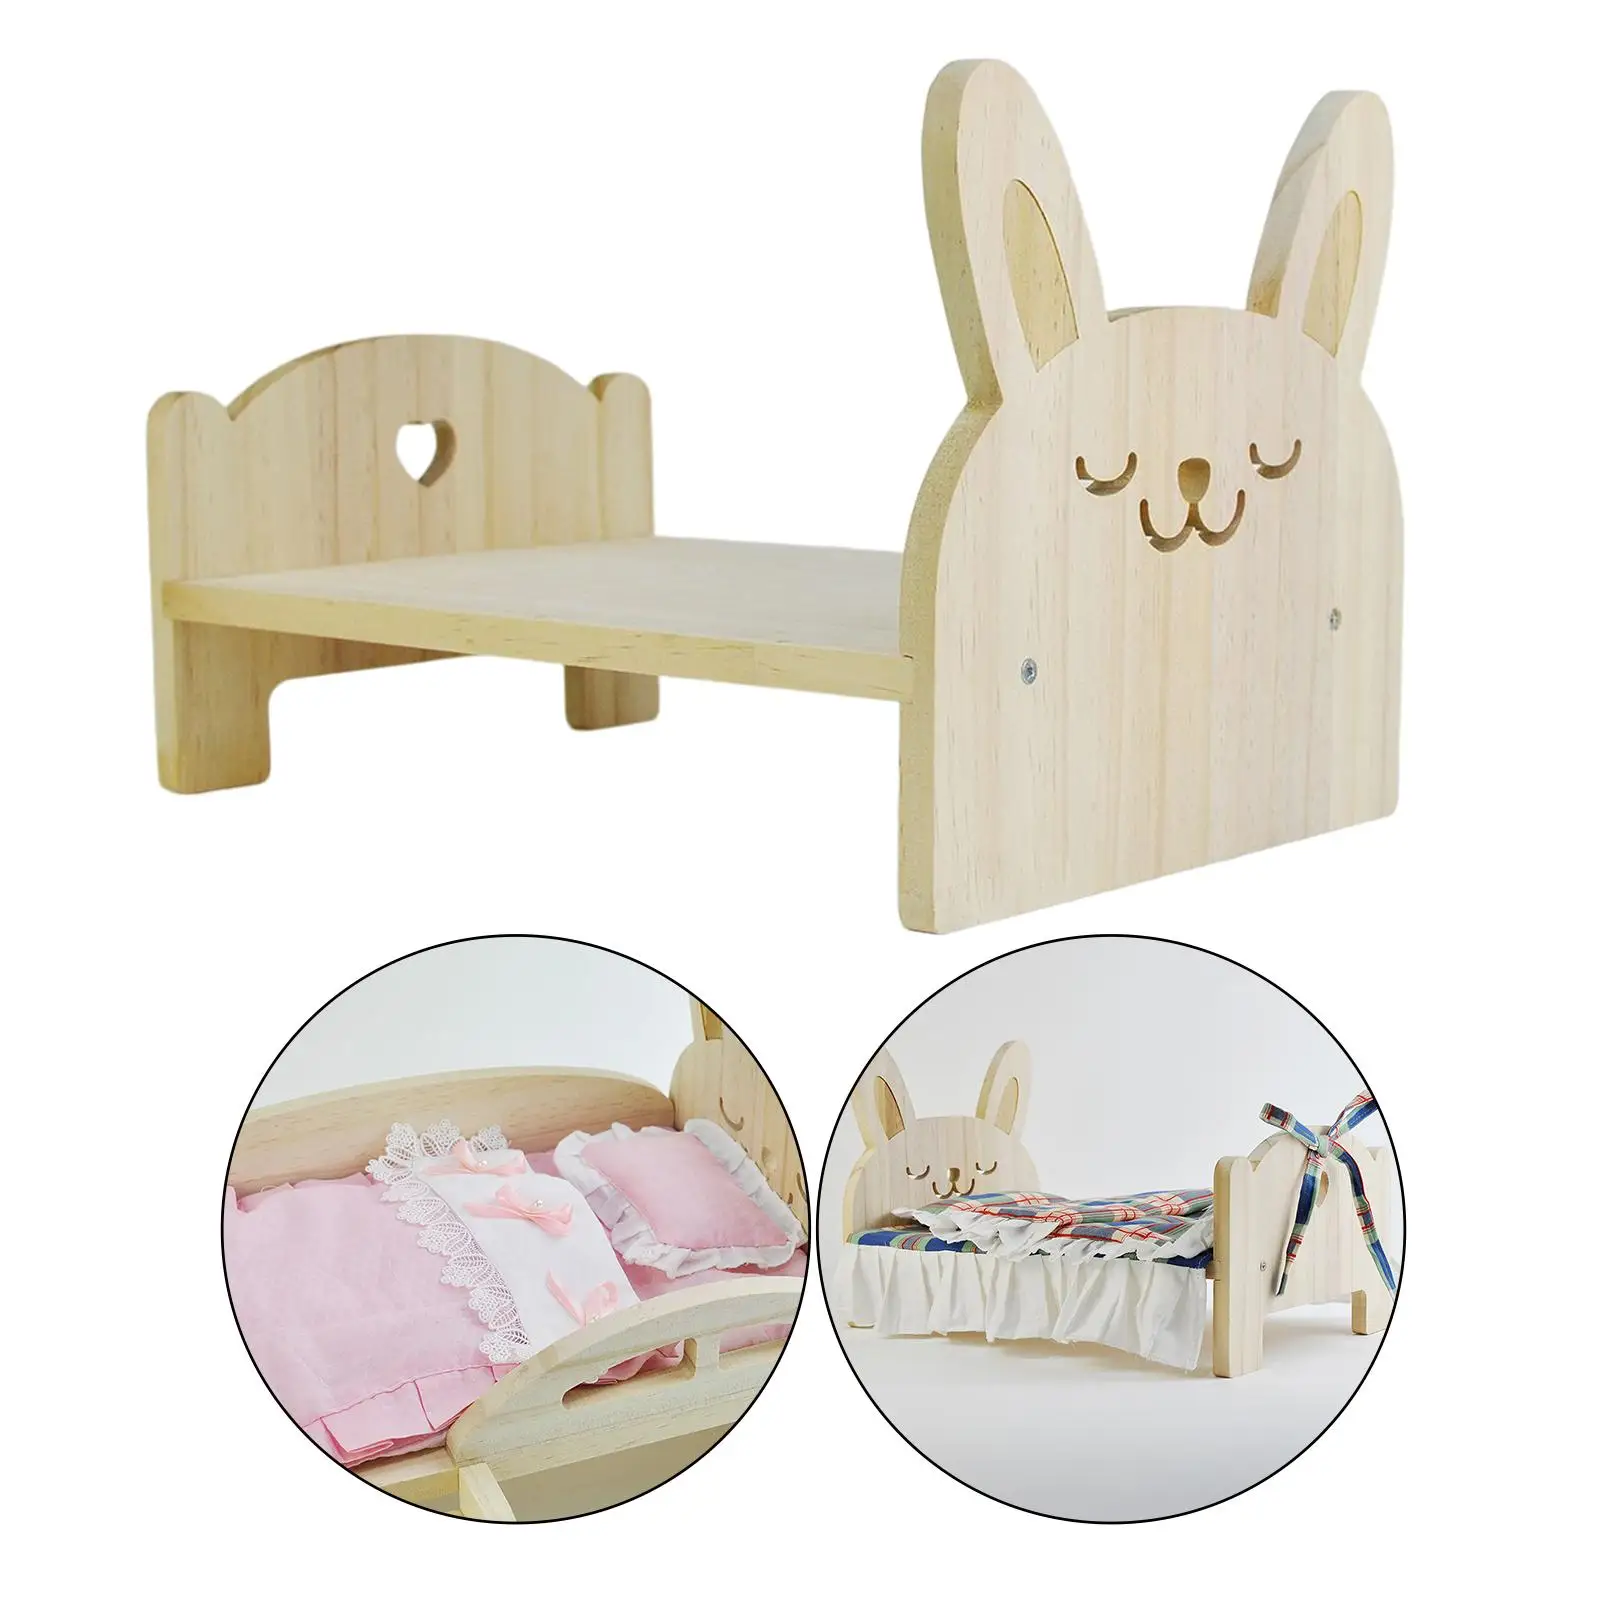 Miniature Dollhouse Furniture 1:6 Decoration Wooden Bed for Dolls Bedroom Life Scene Props Dollhouses DIY Accessories